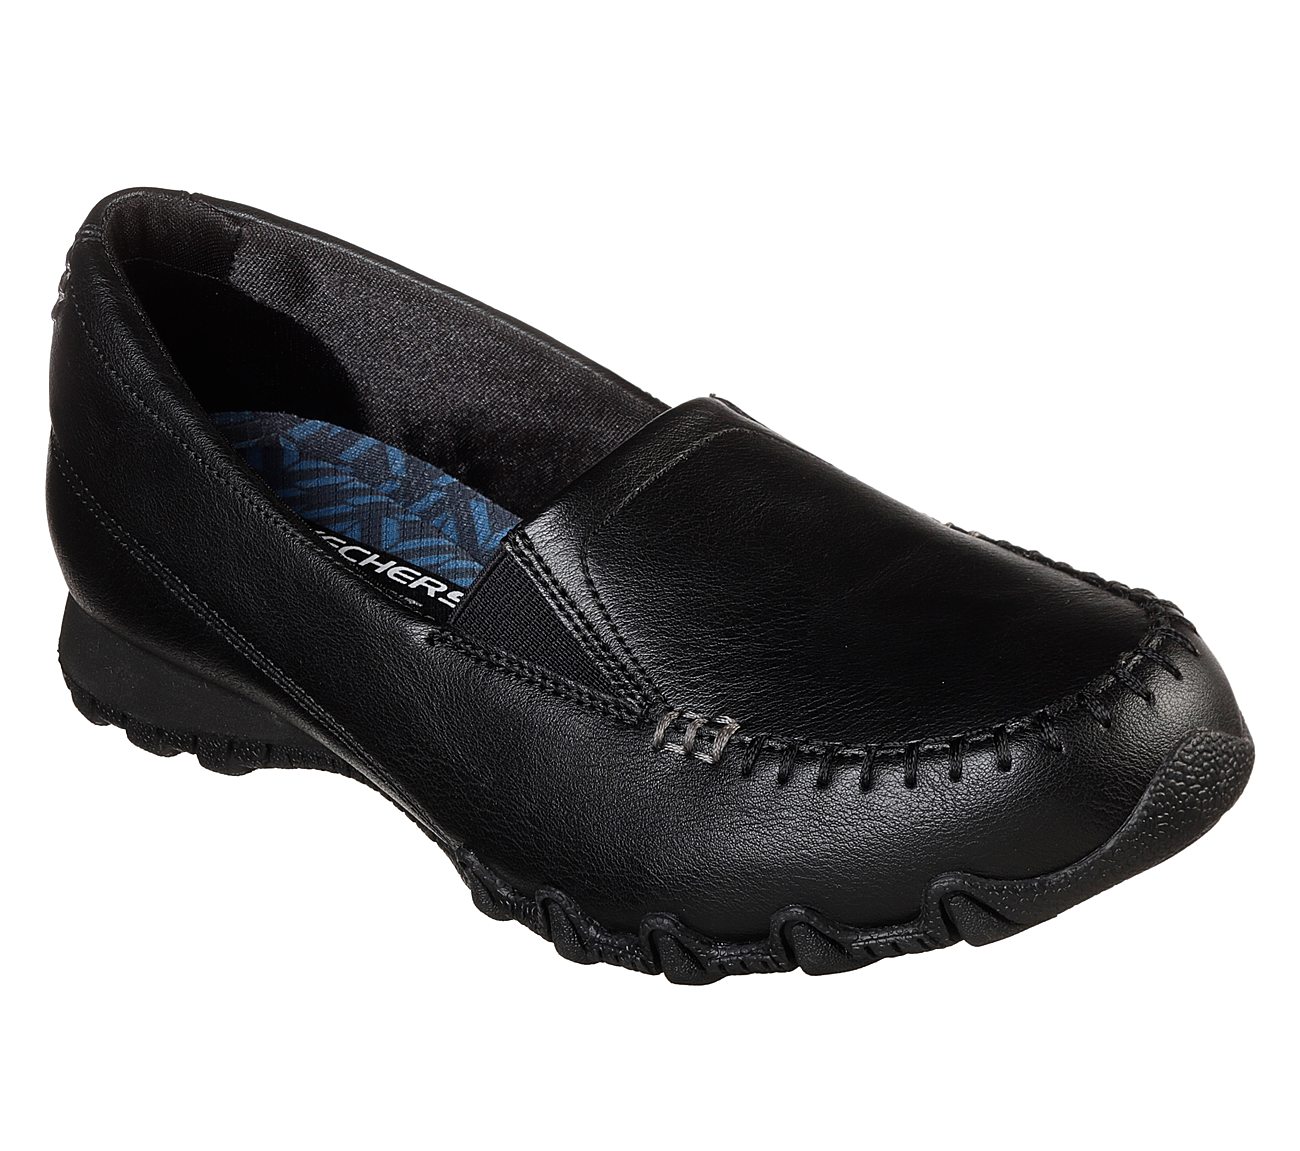 Skechers Relaxed Fit on Sale, 51%.